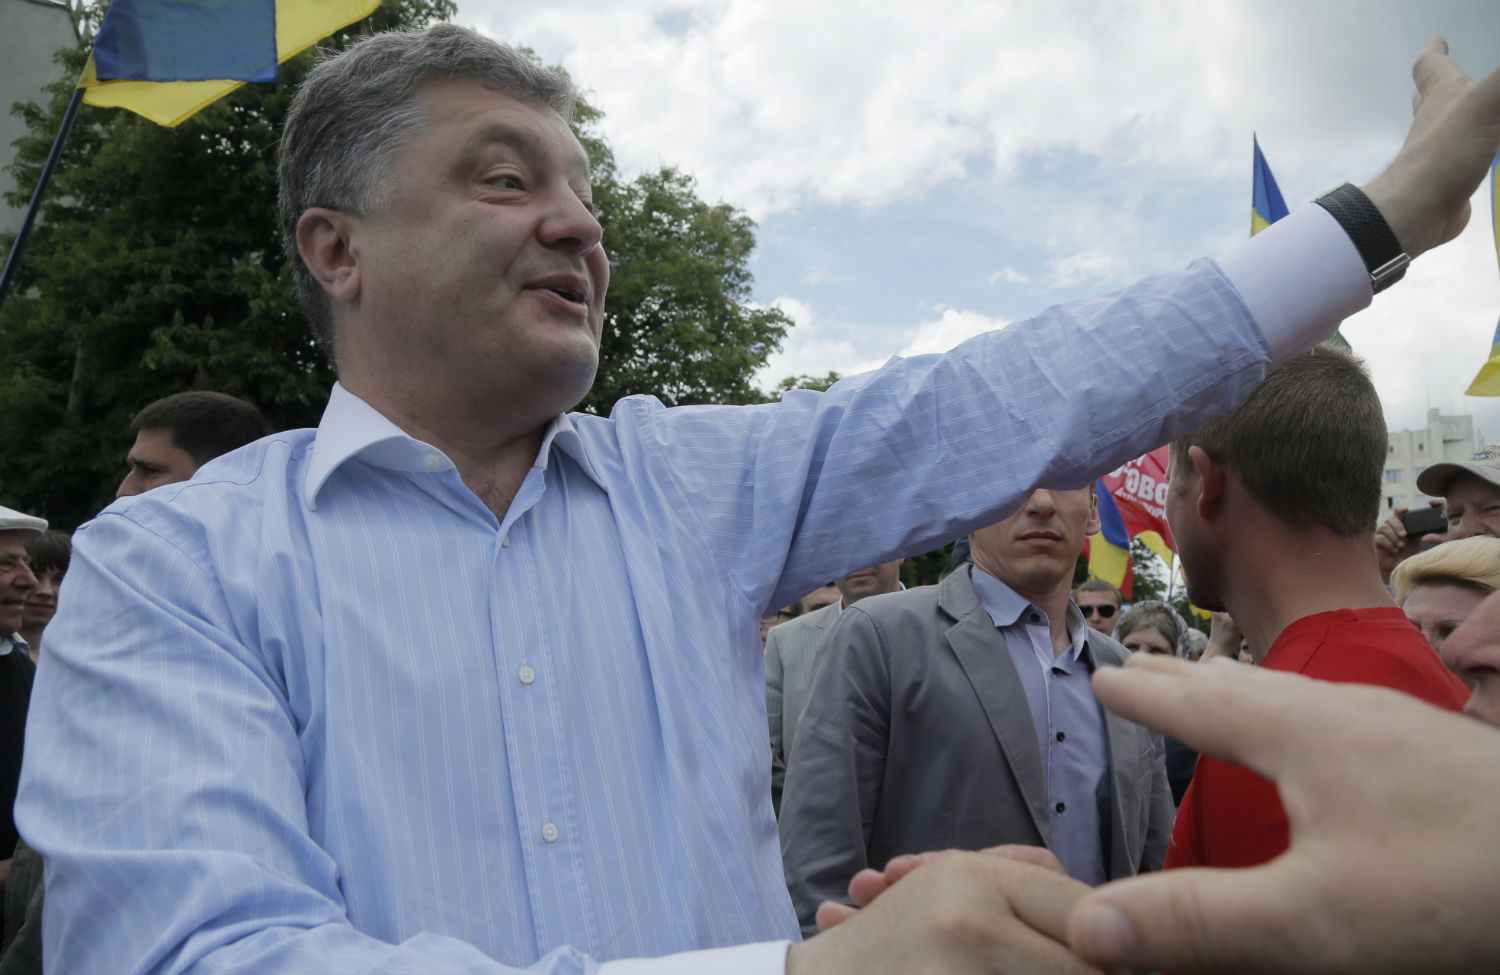 What’s Next for Ukraine, Now That Putin Holds All the Cards?